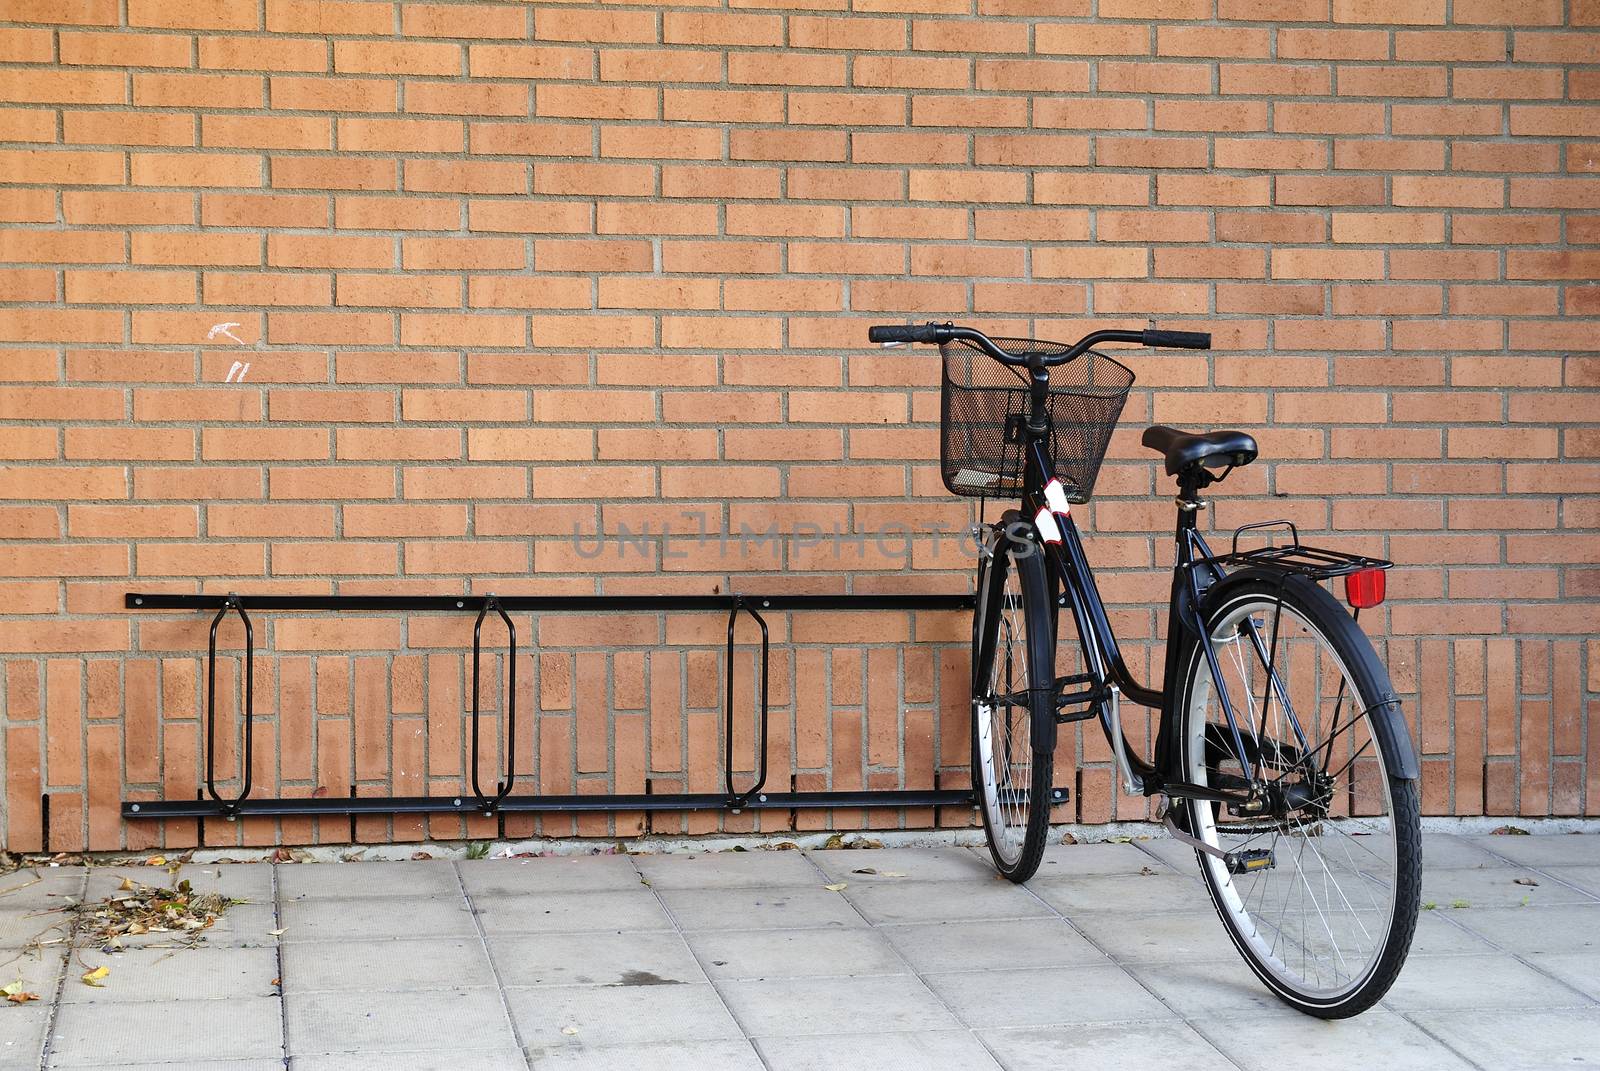 Generic Swedish bicycle parked in front of a typical brick wall.